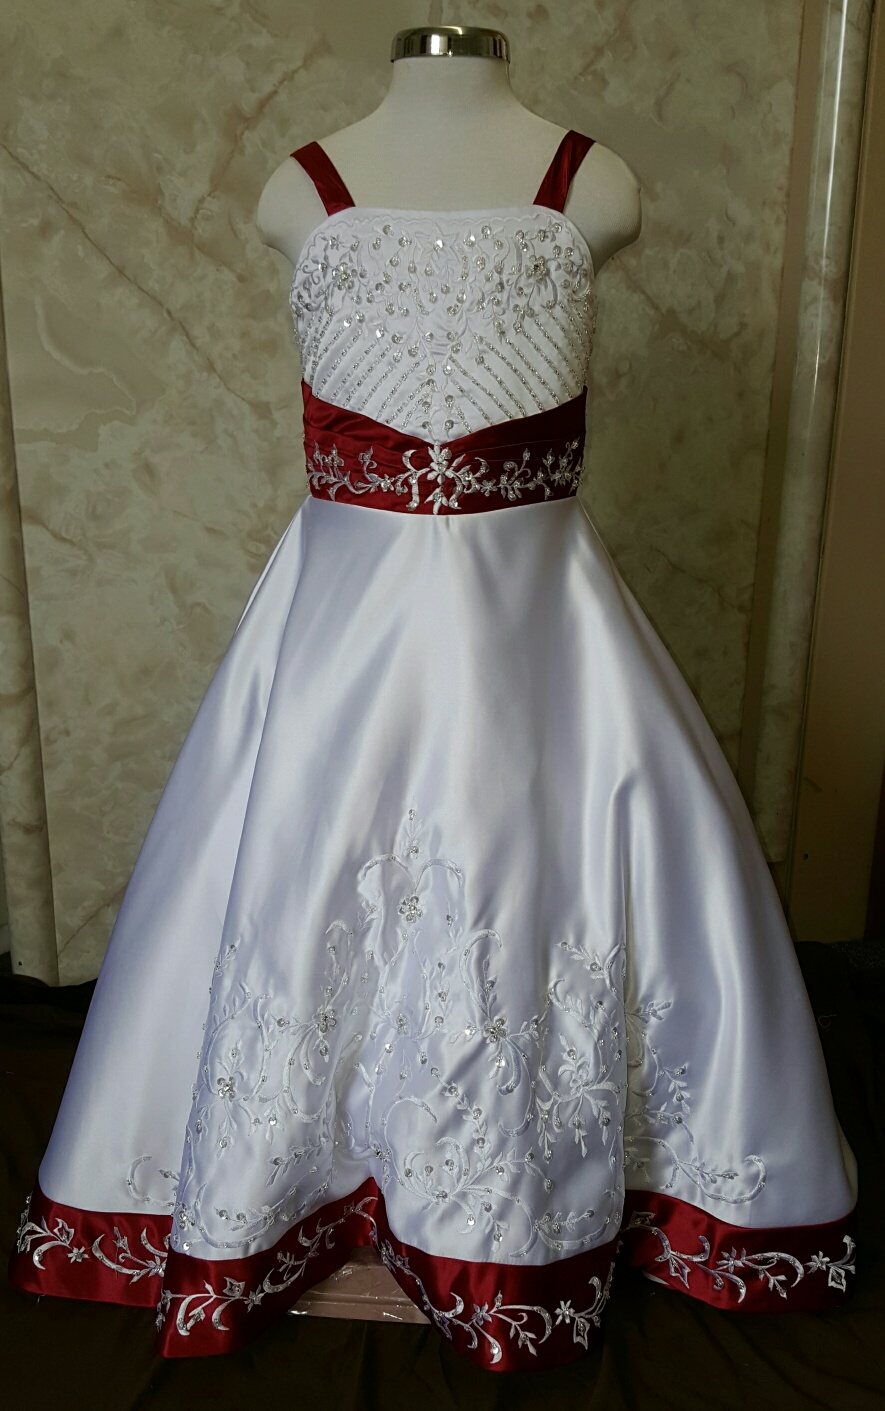 red and white miniature wedding dress